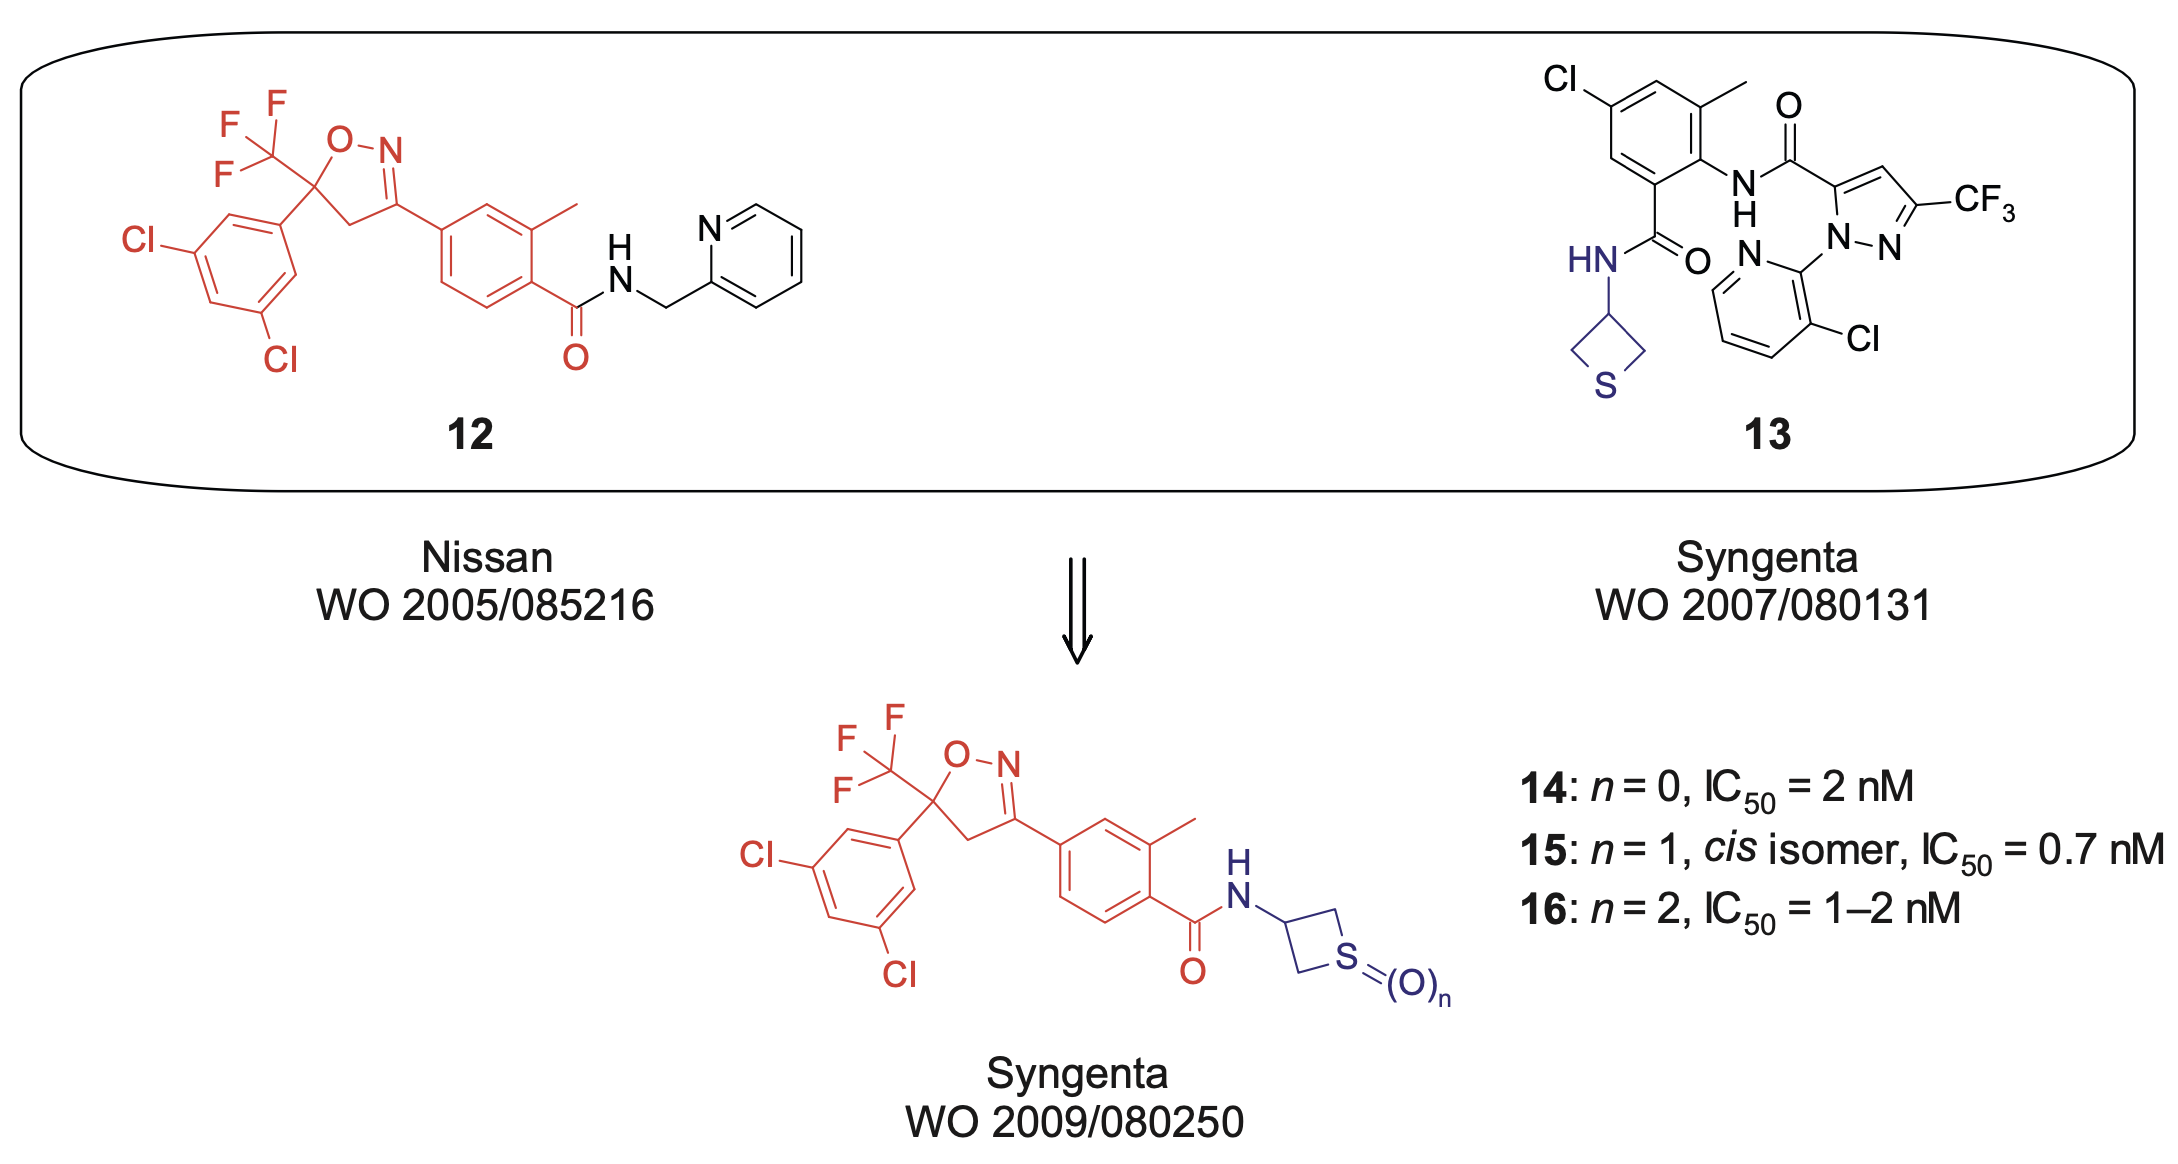 Discovery of Syngenta’s first lead compounds - https://doi.org/10.1016/B978-0-12-821035-2.00008-5&nbsp;